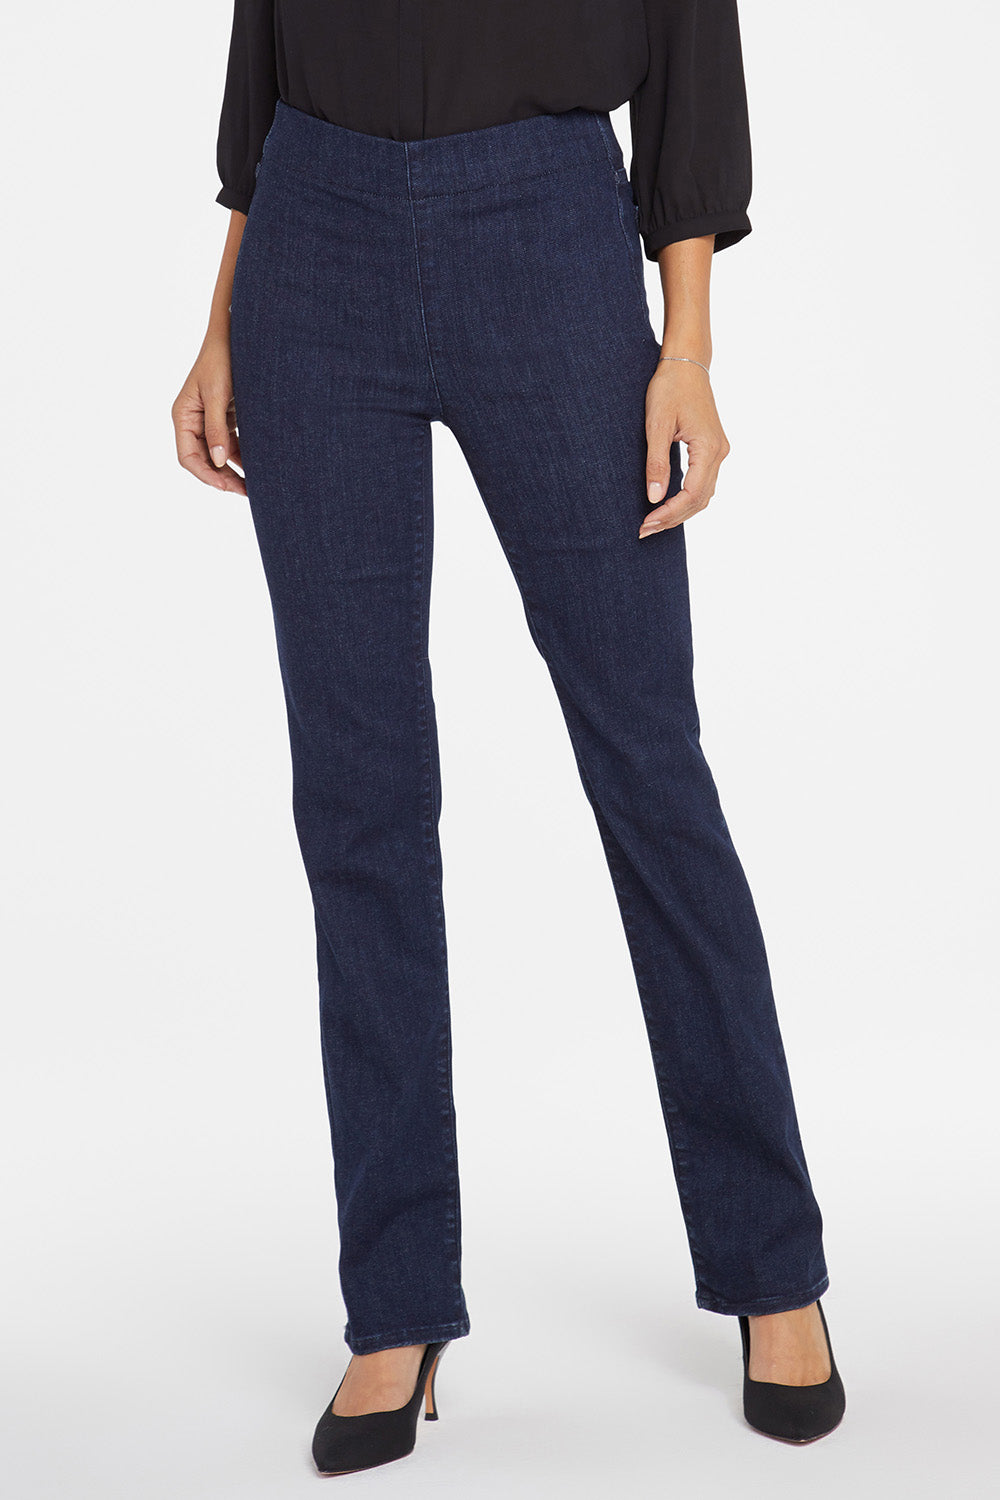 NYDJ Marilyn Straight Pull-On Jeans In SpanSpring™ Denim - Langley